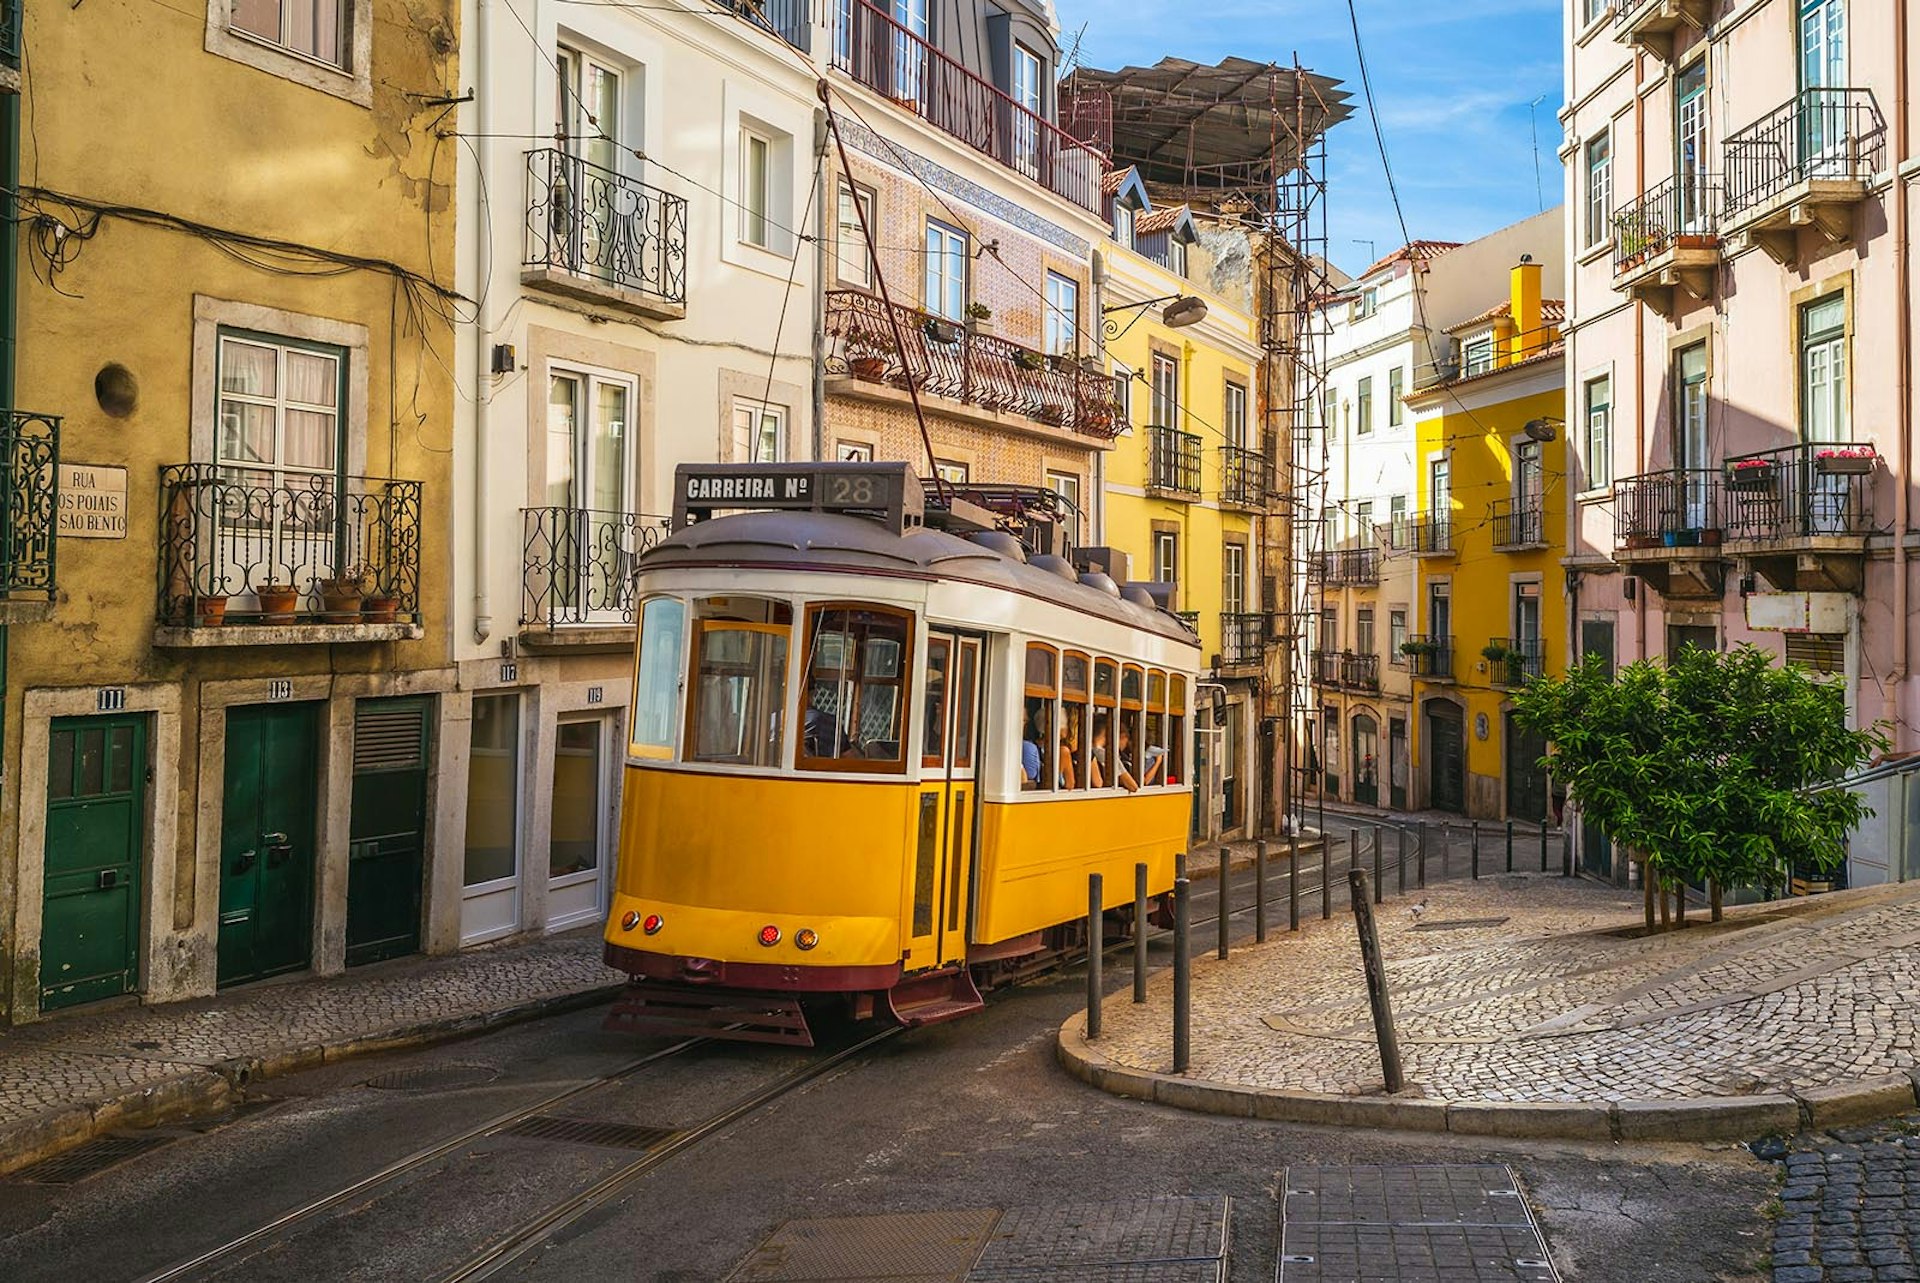 Vintage yellow Tram #28 weaving through the city streets of Lisbon, Portugal